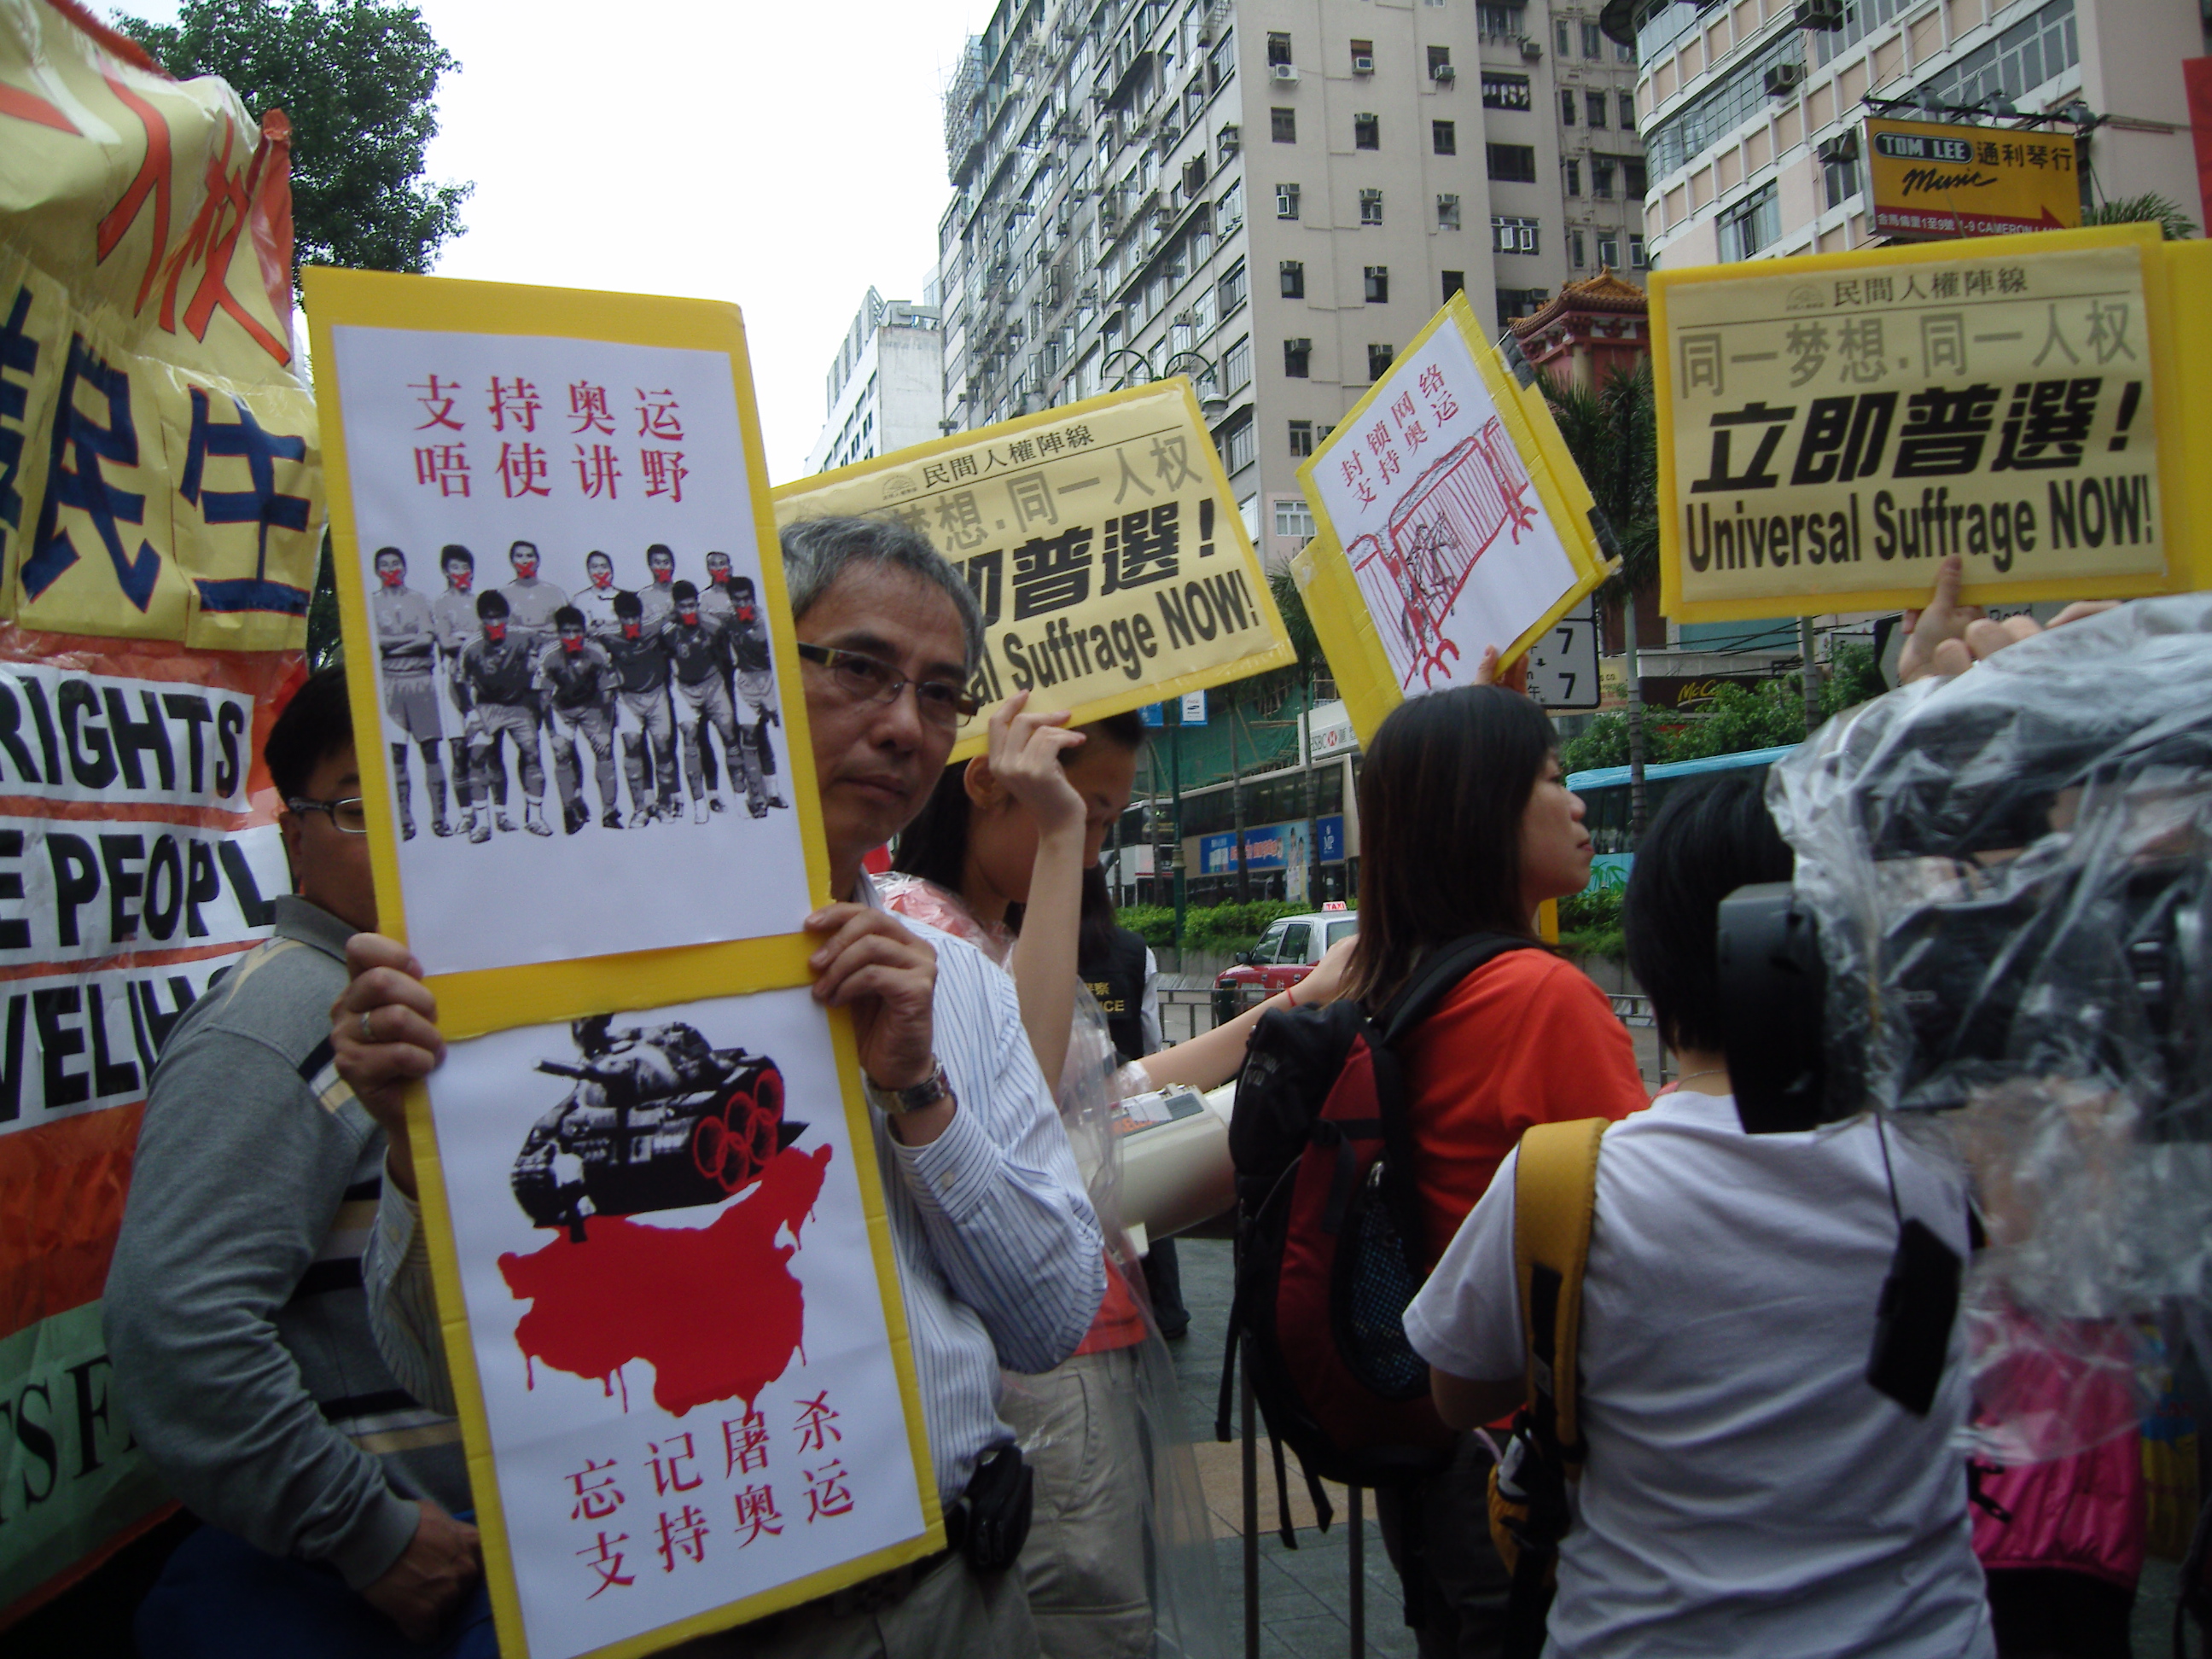 Hong Kong protesters demanded universal suffrage in 2008.